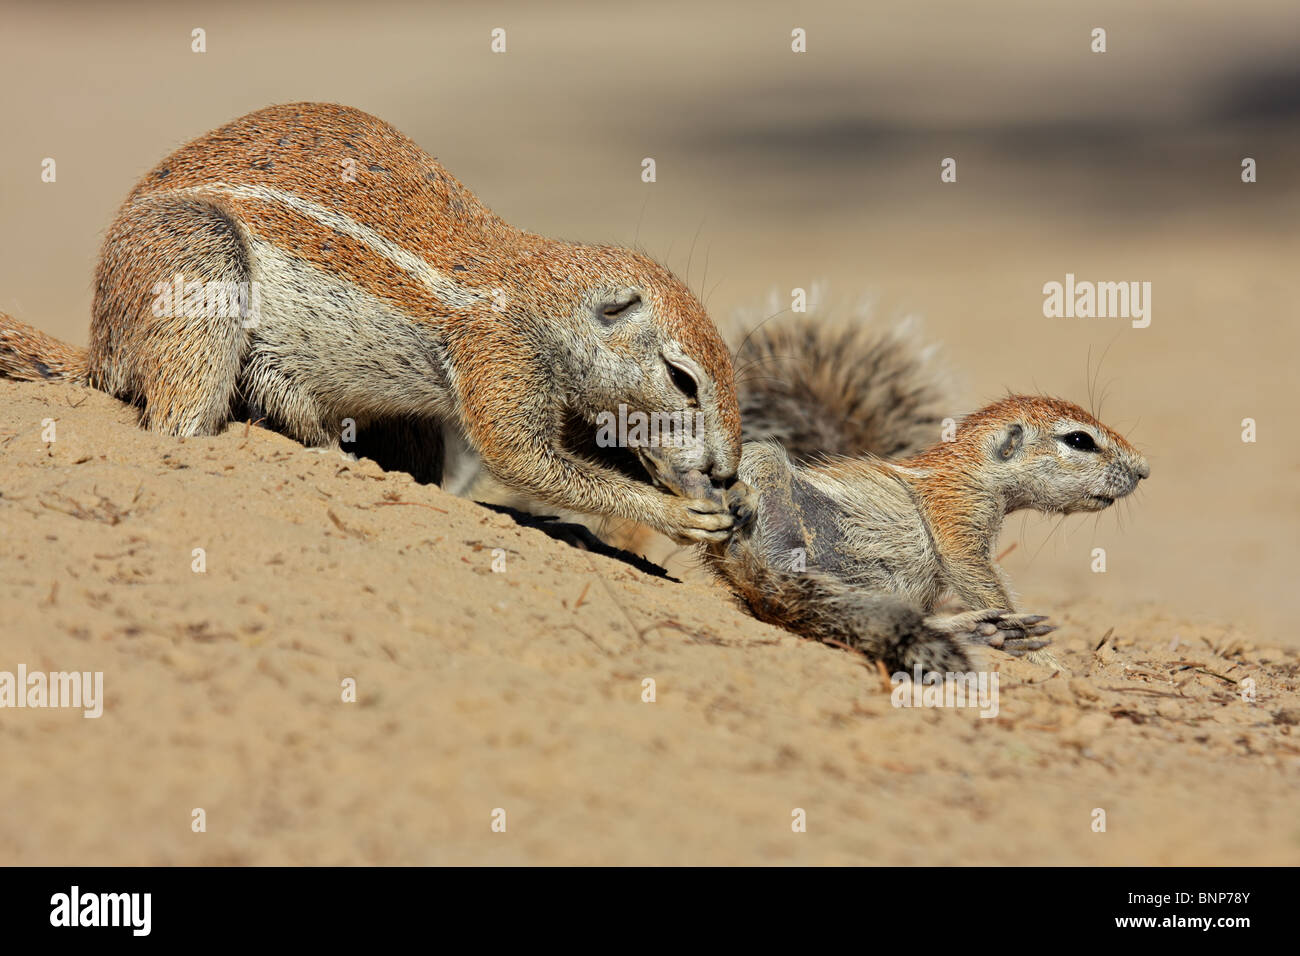 A female ground squirrel (Xerus inaurus) with her young, Kgalagadi Transfrontier Park, South Africa Stock Photo